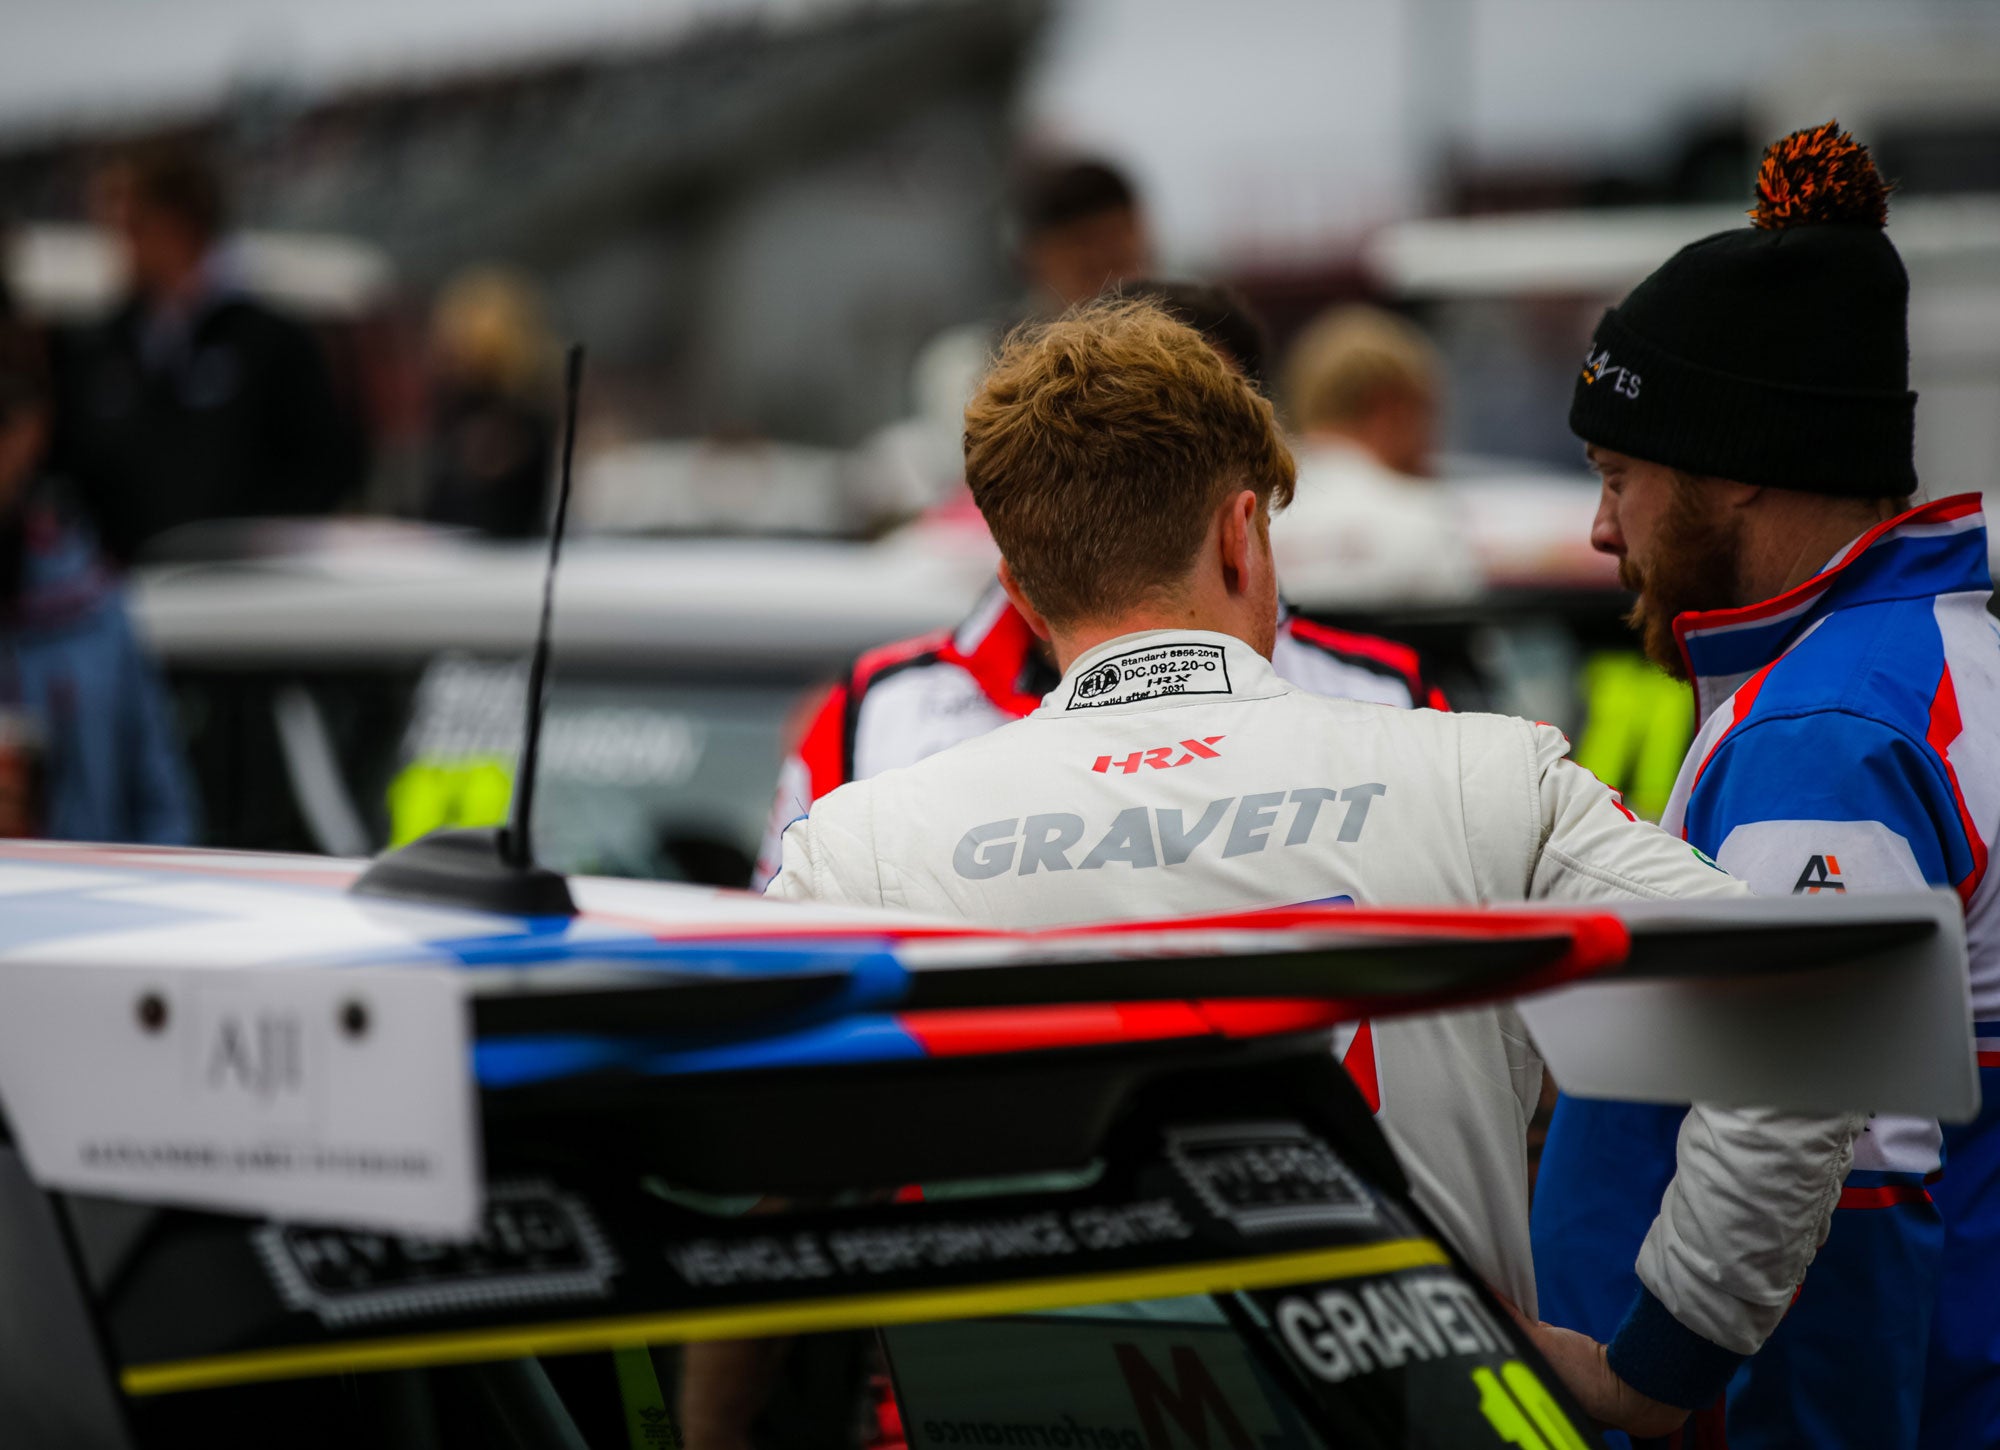 Bradley Gravett son of BTCC British Touring Car Champion Robb Gravett in the MINI Challenge JCW Series at Silverstone National Tyre Test in 2022 Talking to Sam Pearce Graves Motorsport Cooper Racing Driver LIQUI MOLY LM Performance Thinking it Better